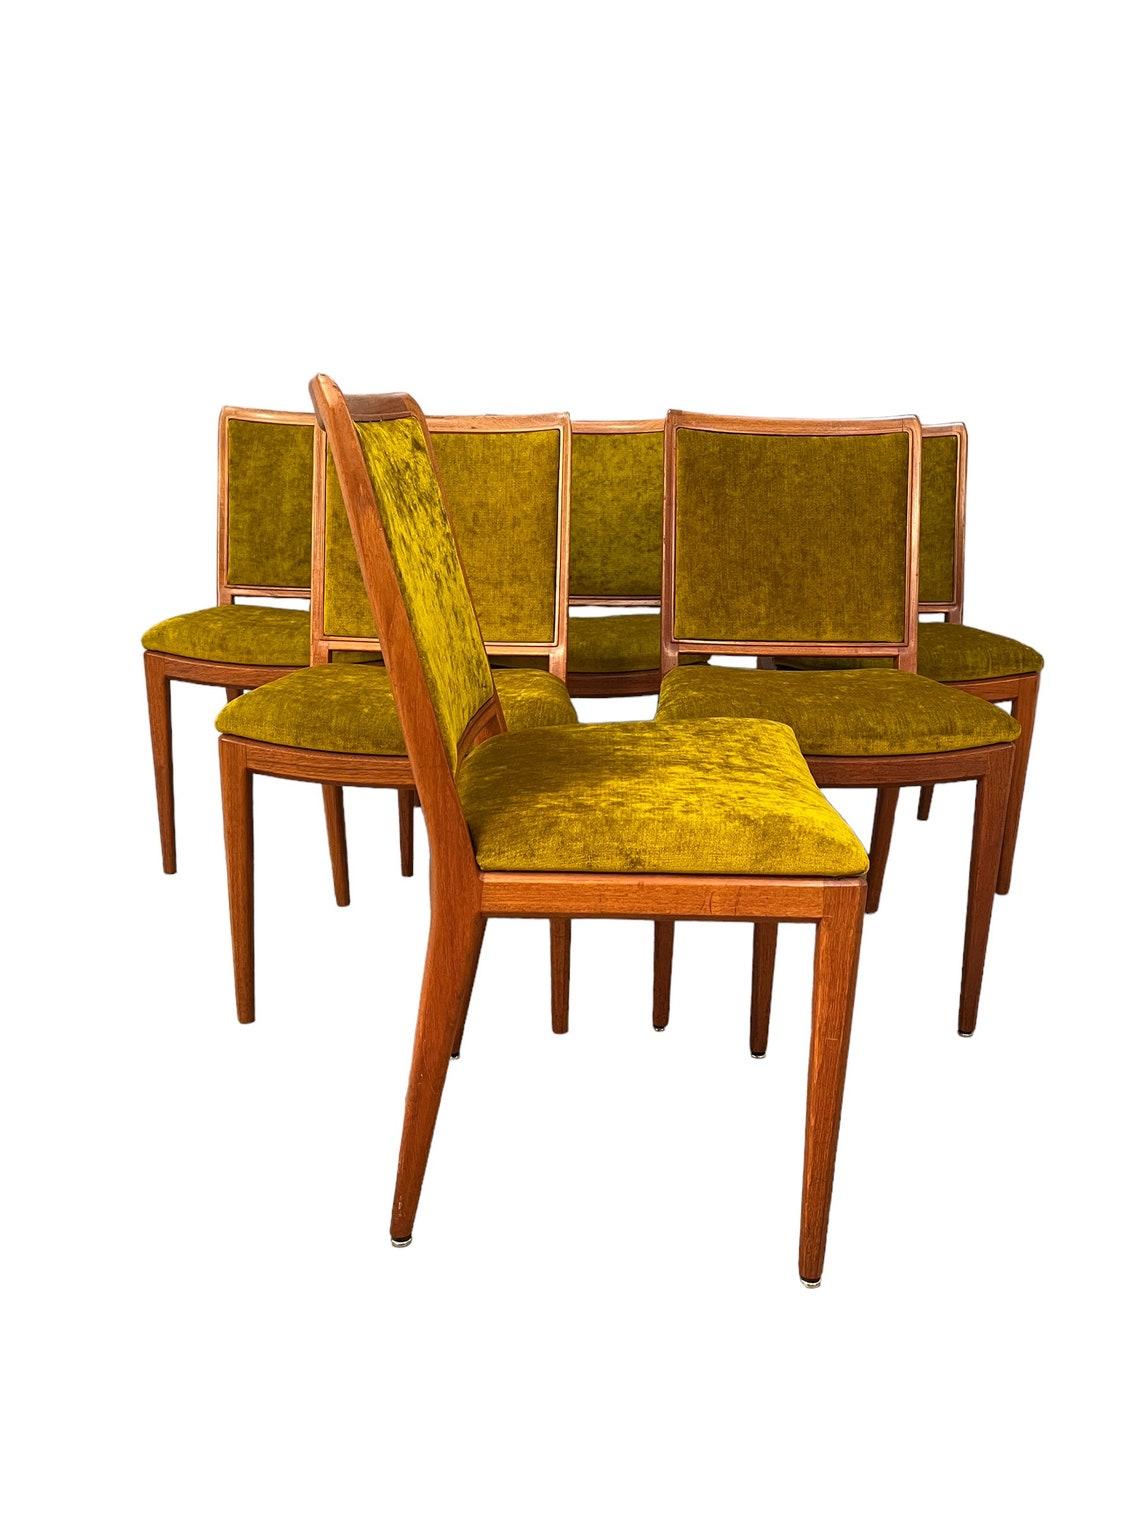 Curated Mid-Century danish teak dining chairs set of 6 1960's with brand new Upholstery green velvet / gold.
confortable et robuste comme neuf. 
Dimensions : L19 1/2 X D17 x H34 1/2 pouces 
Hauteur du siège : 18 pouces